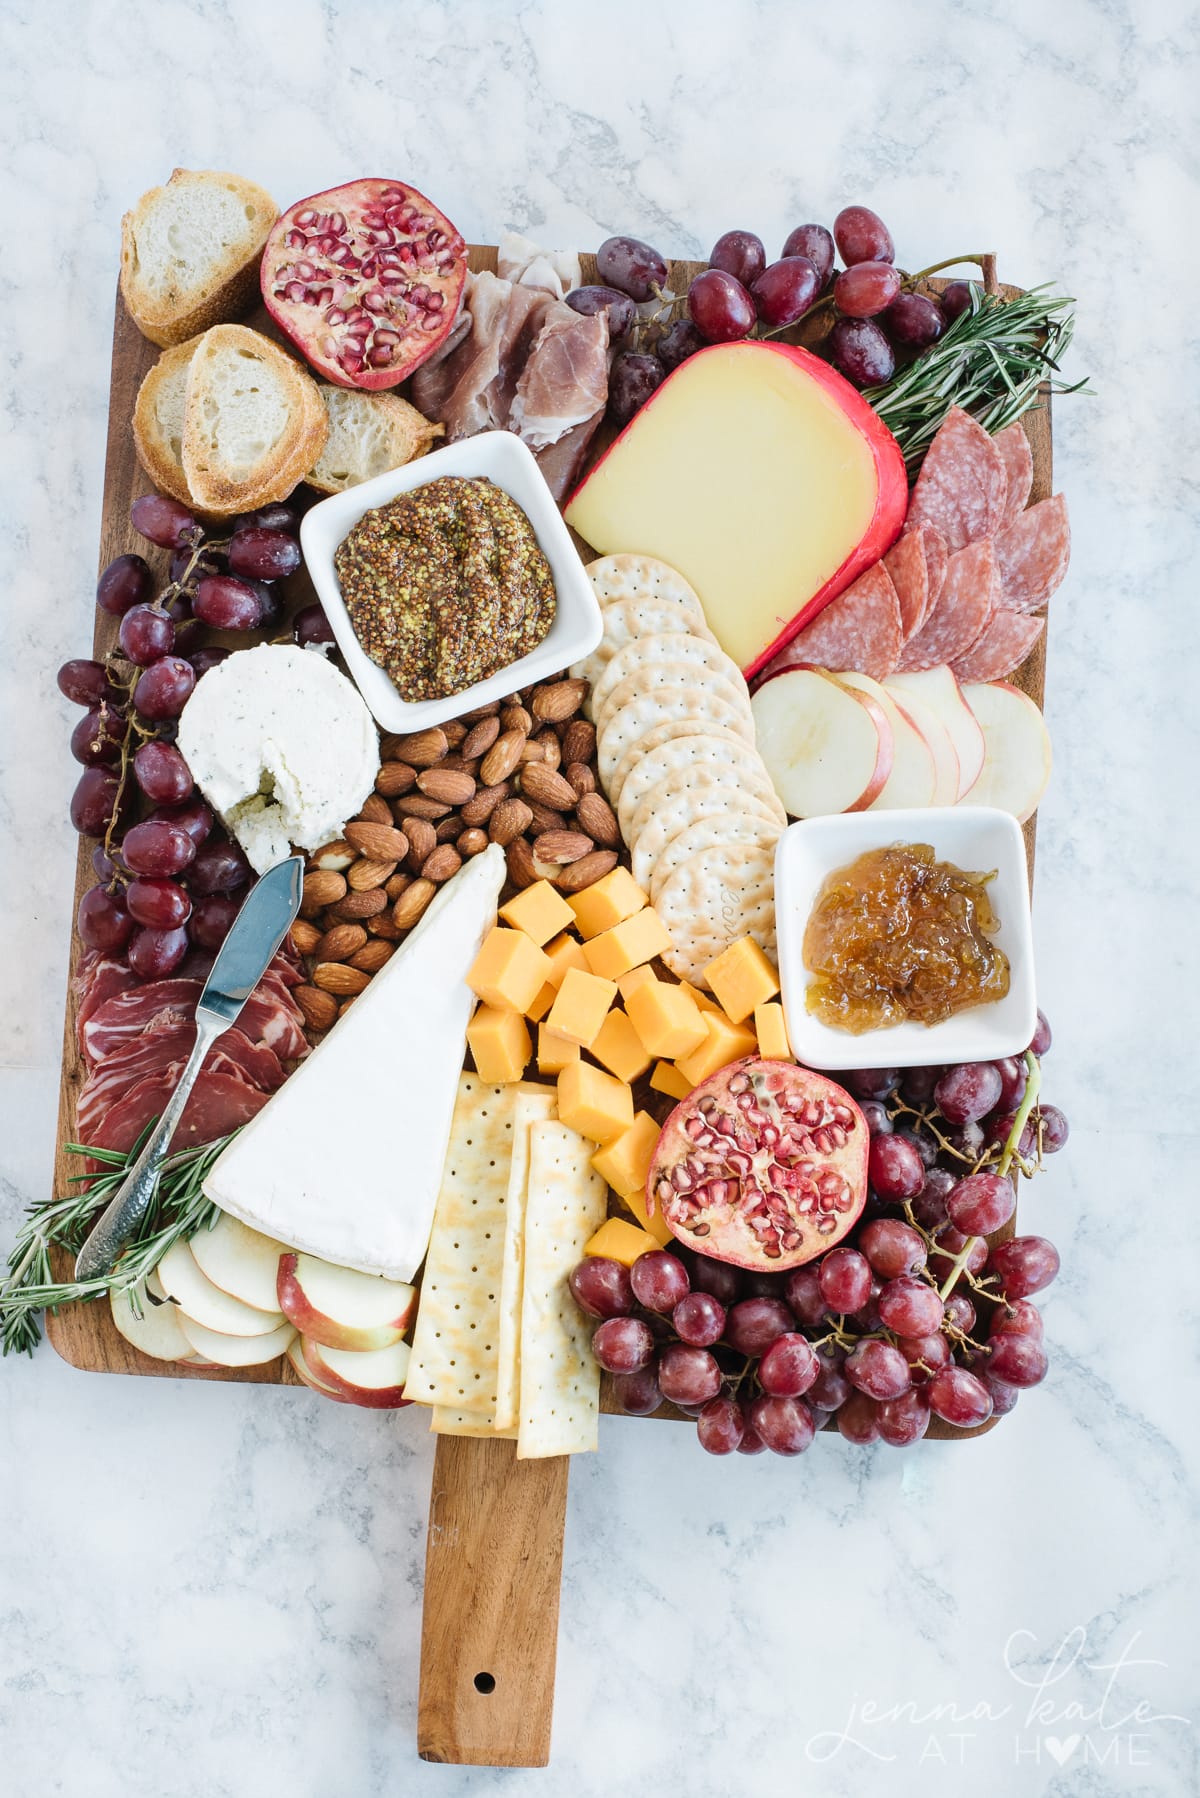 Charcuterie board for a wine tasting party filled with fruits, cheeses, meats and crackers